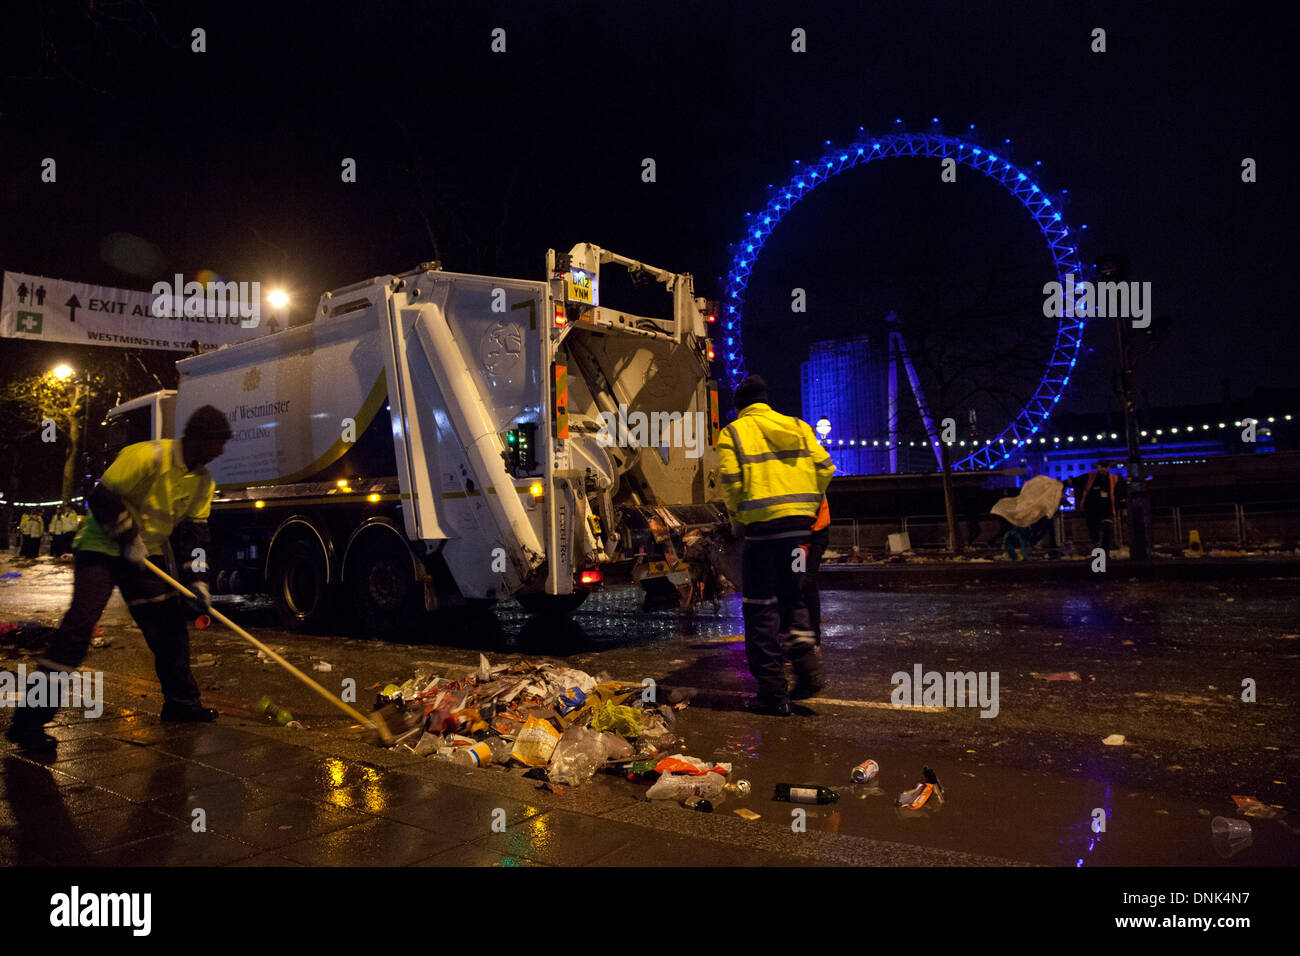 London, UK. 1st January 2014. More than 250,000 people turned out to watch the fireworks, with the council mounting a huge clean-up operation today to get London back to its best. Credit:  nelson pereira/Alamy Live News Stock Photo